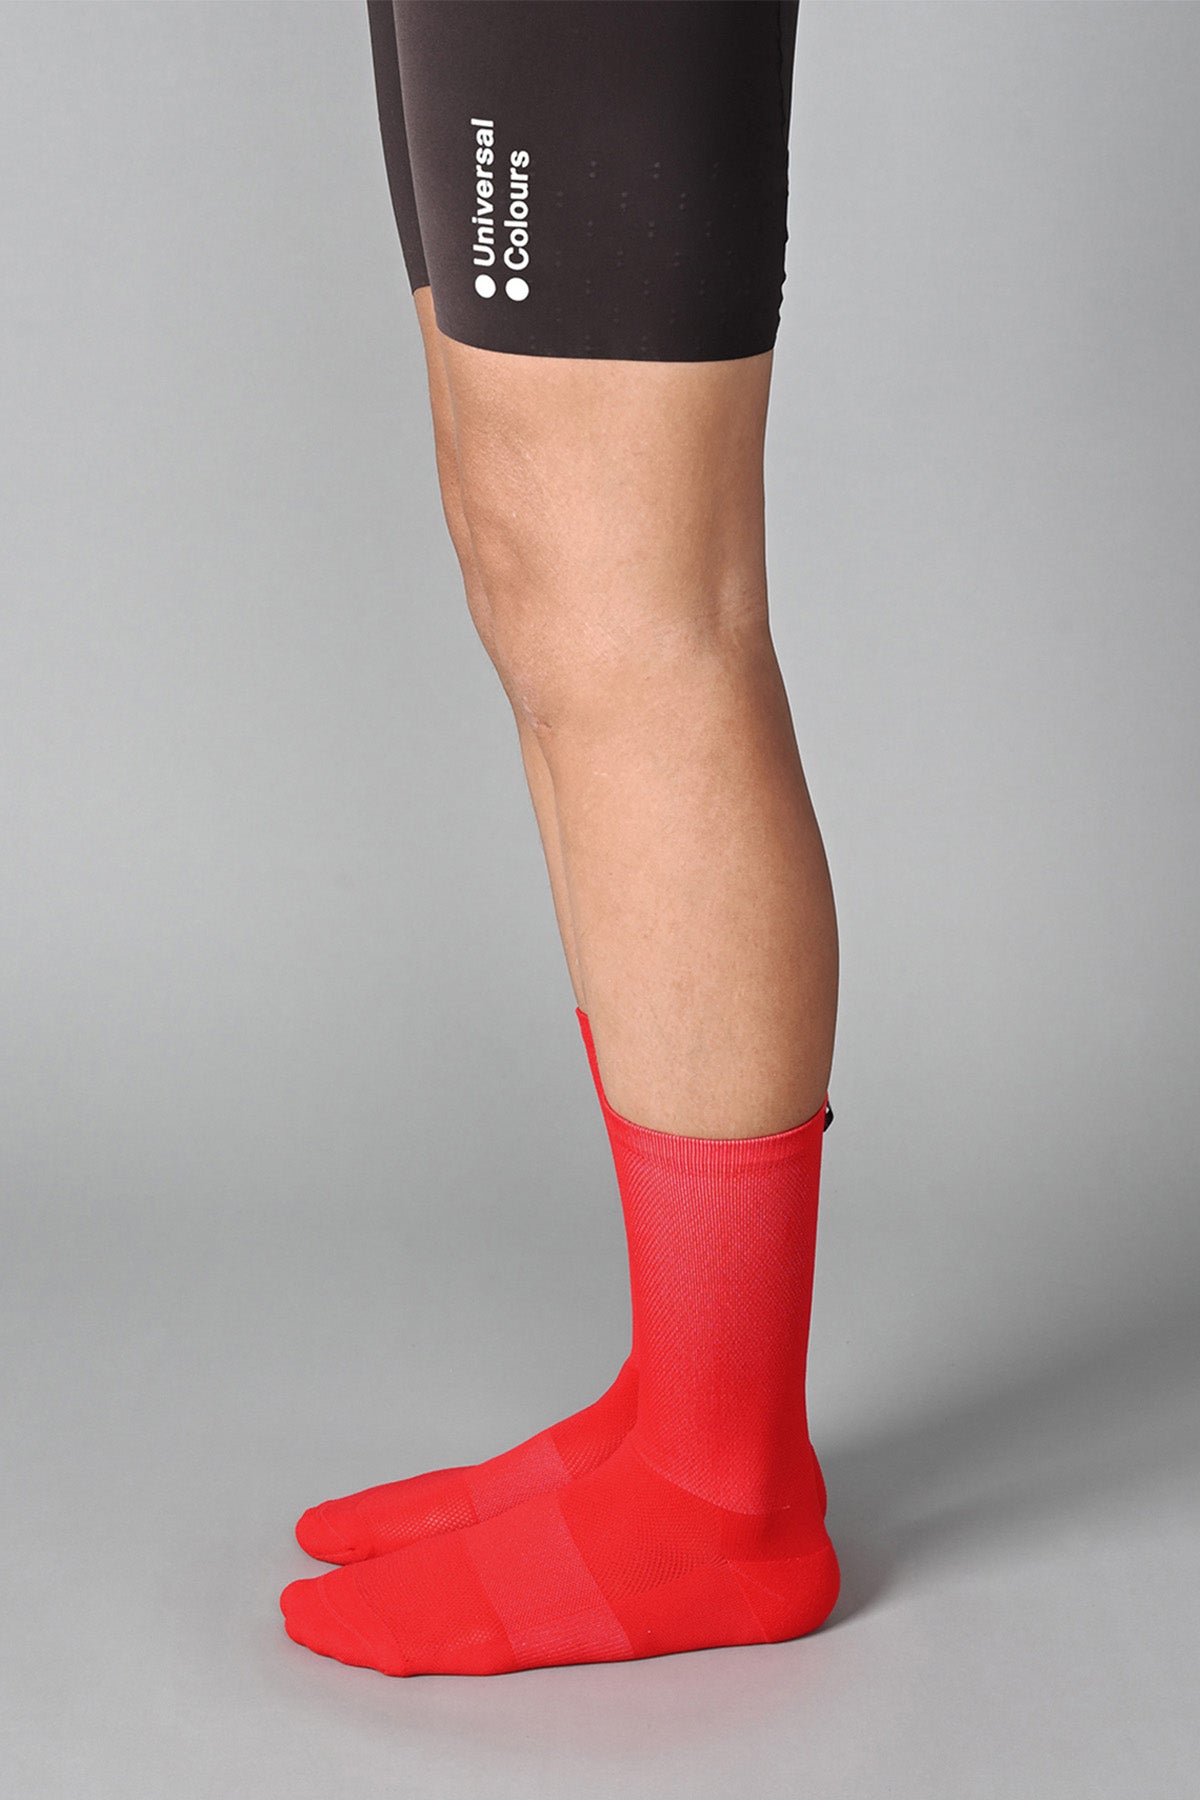 STEALTH - CANDY APPLE RED SIDE | BEST CYCLING SOCKS